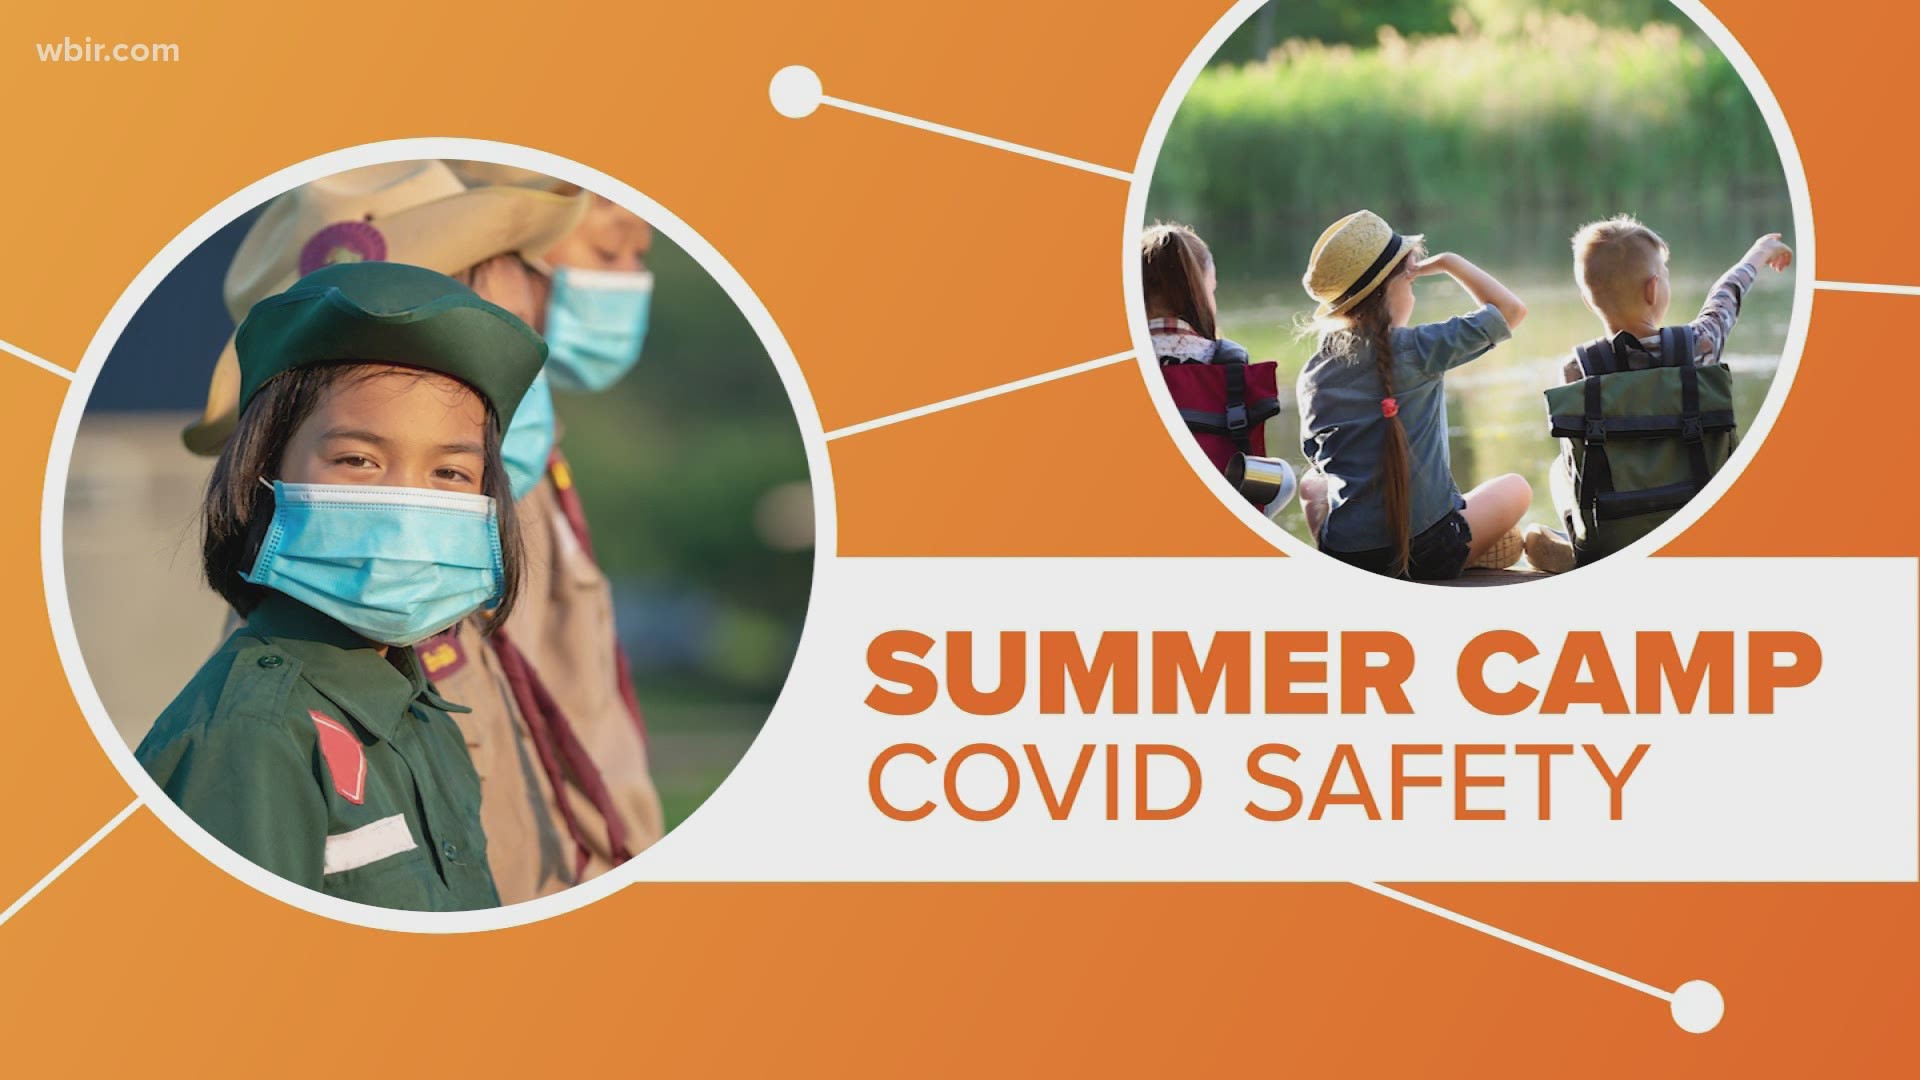 Summer is just around the corner and before COVID-19 that meant summer camp for kids. So how safe is it for some fun in the sun this year? Let's connect the dots!